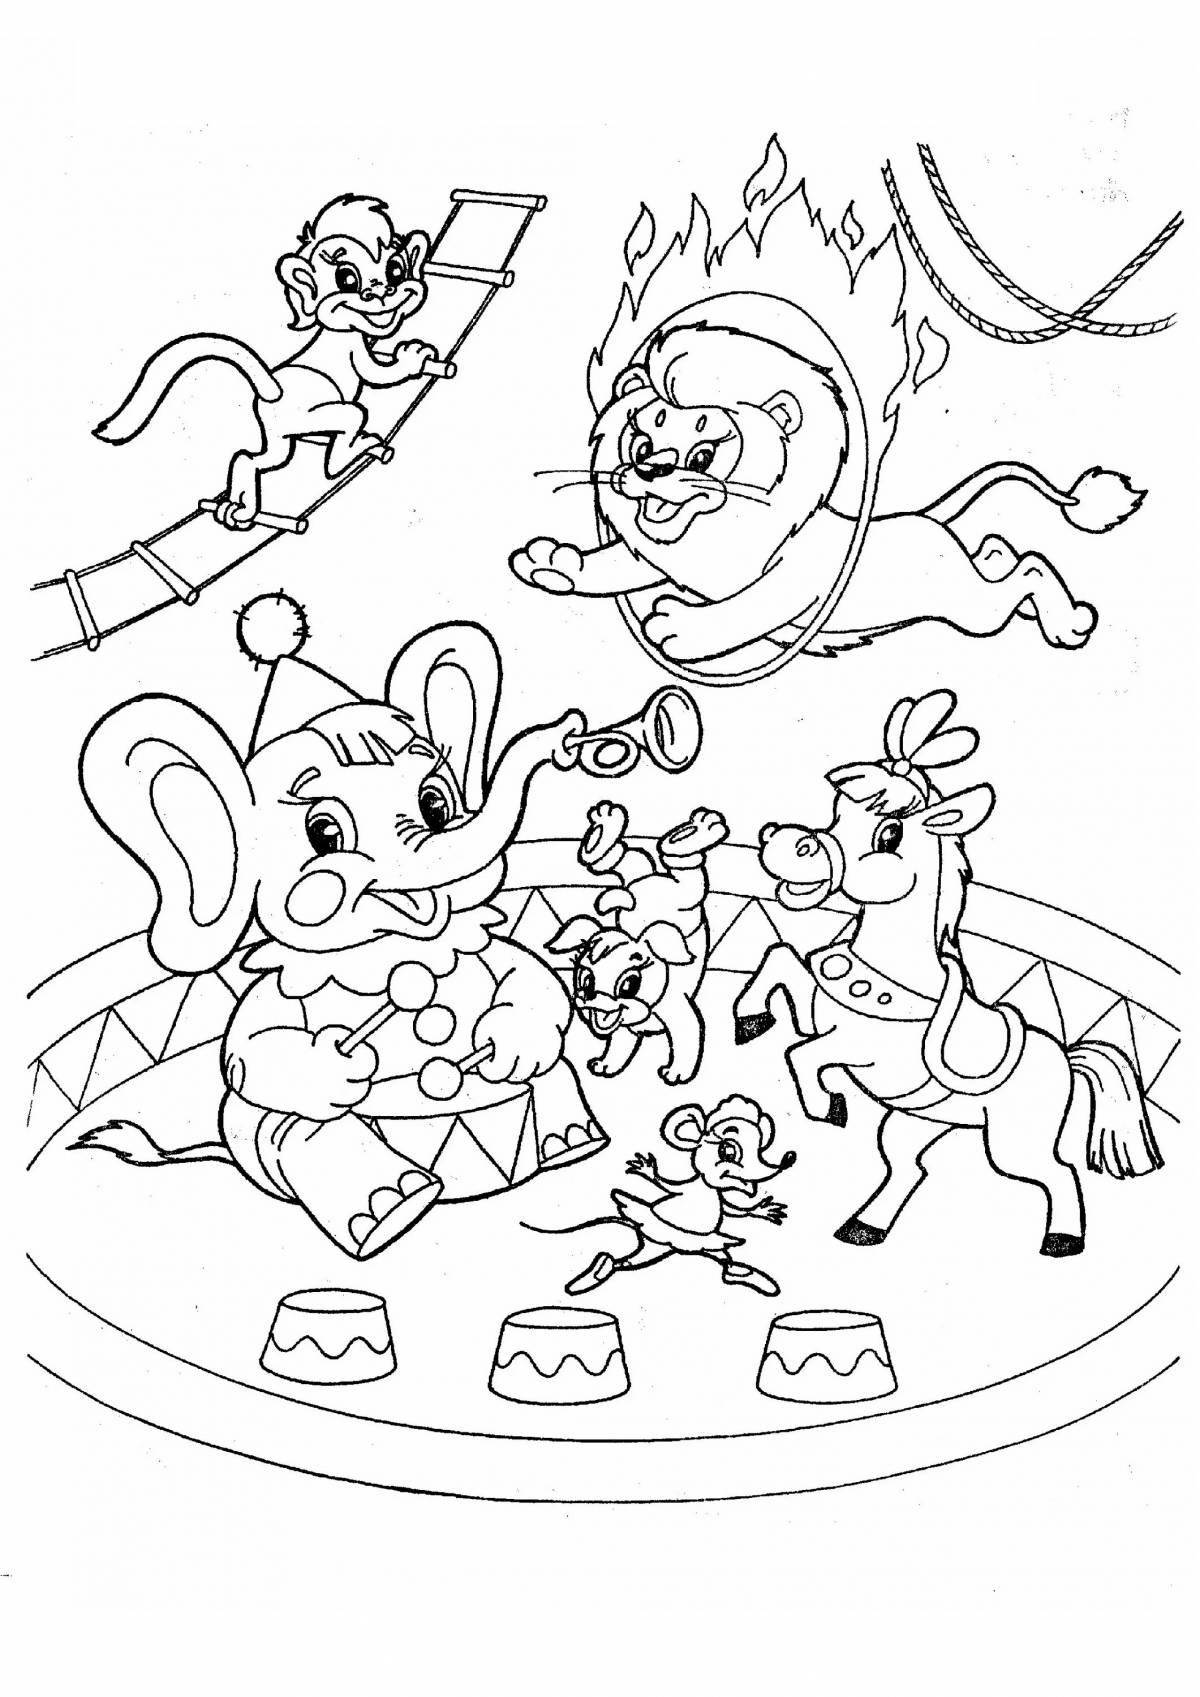 Violent circus coloring pages for kids